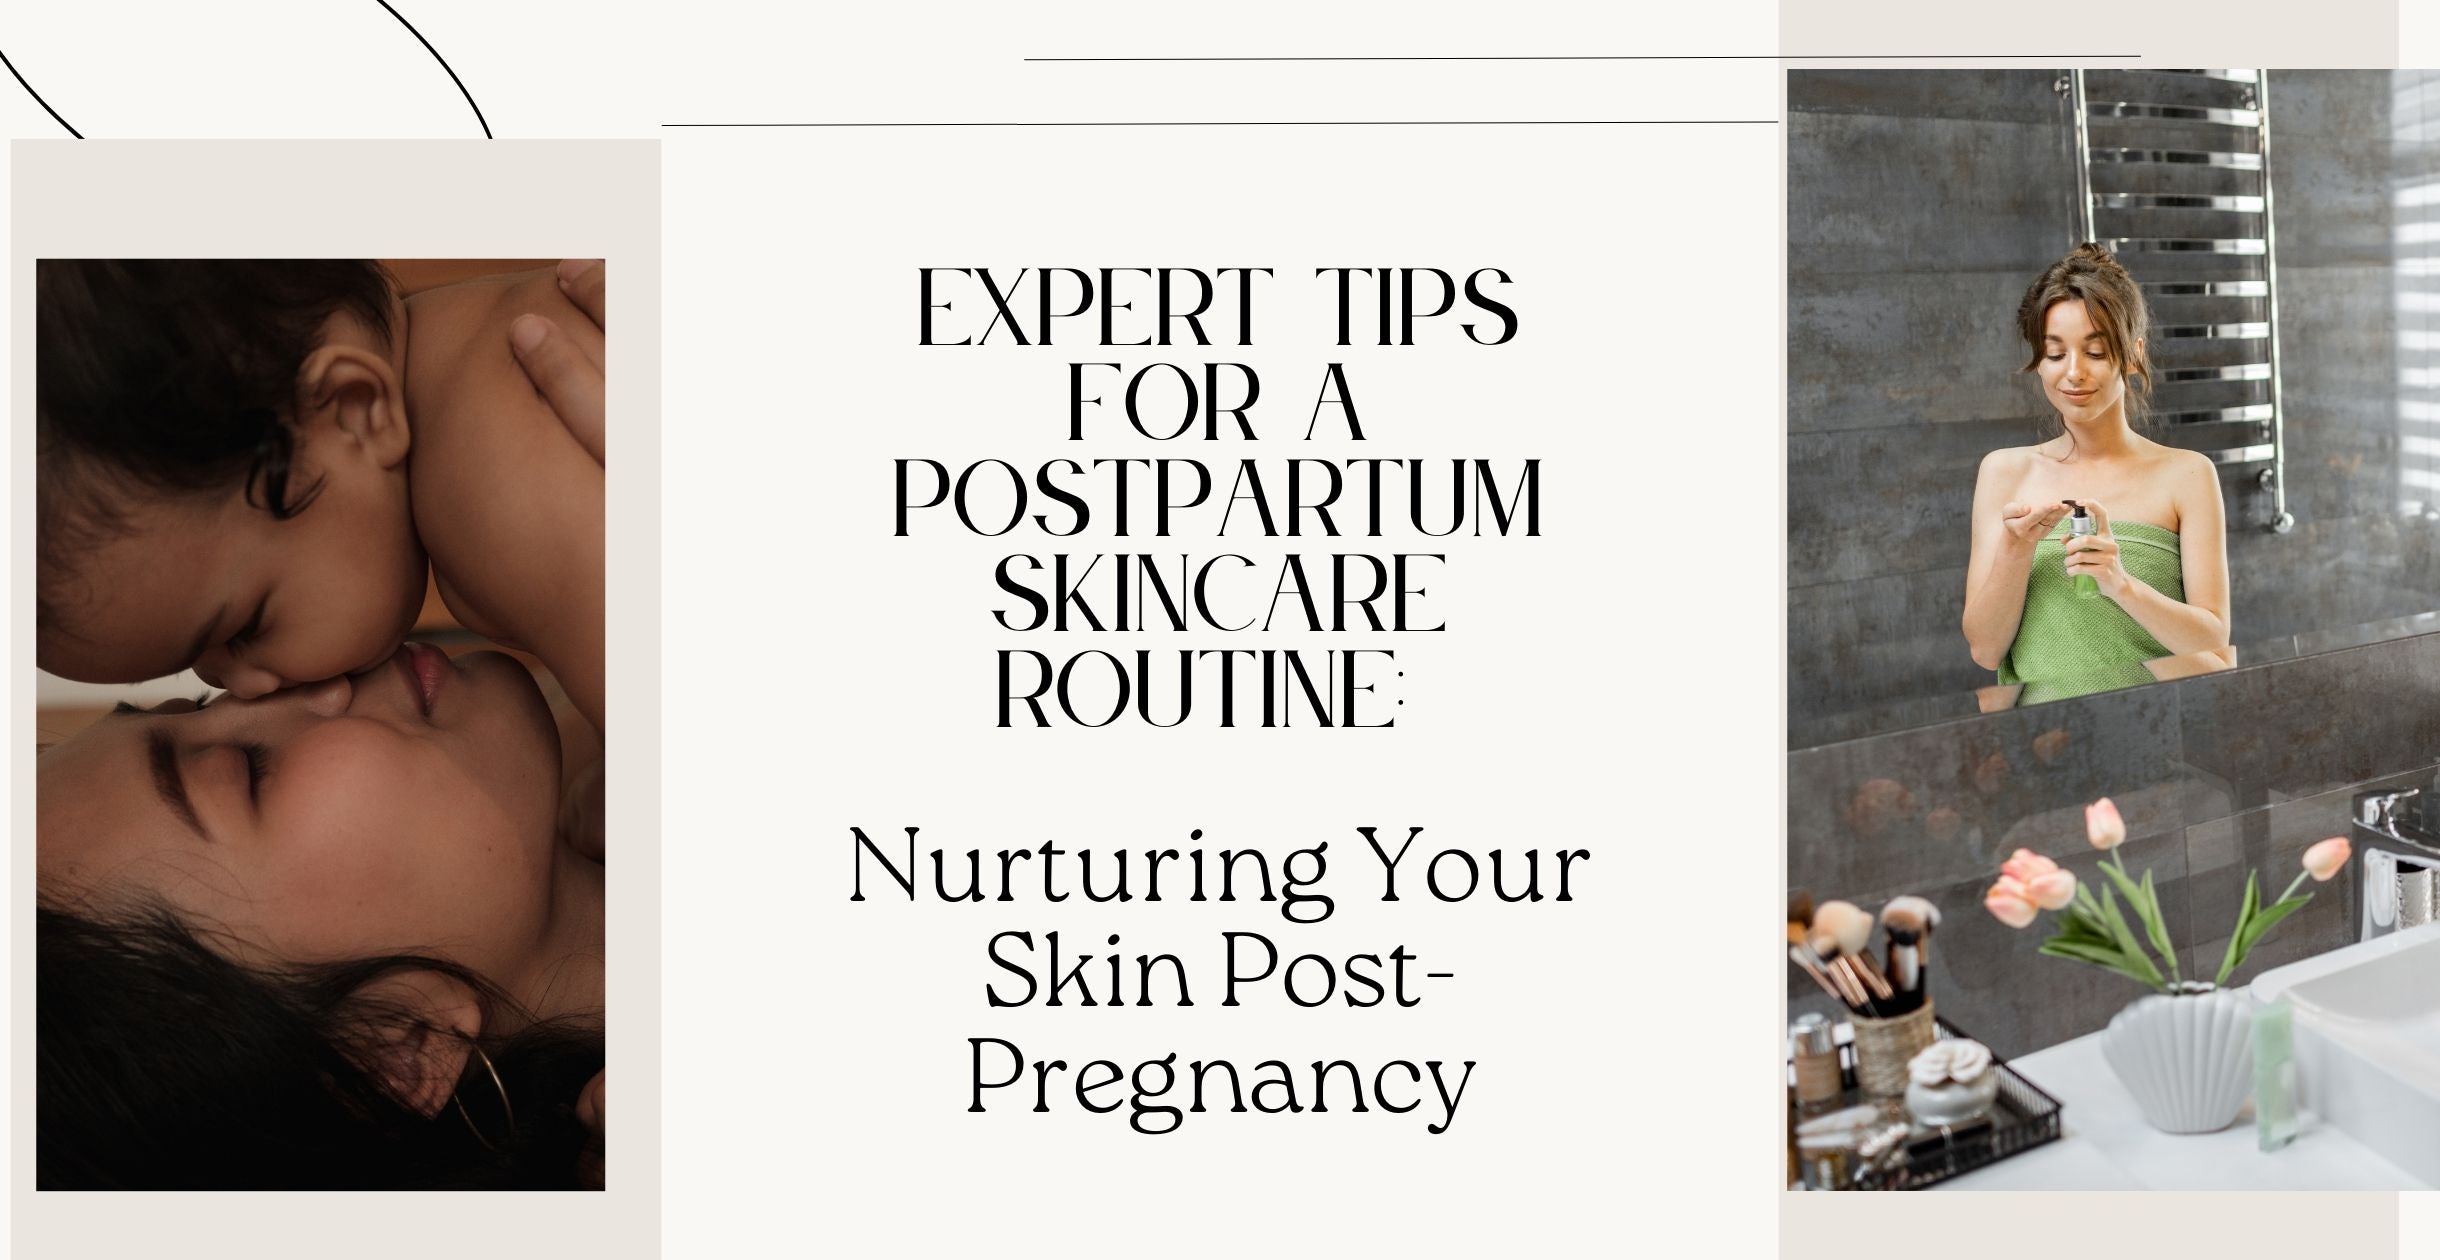 Expert Tips for a Postpartum Skincare Routine: Nurturing Your Skin Post-Pregnancy